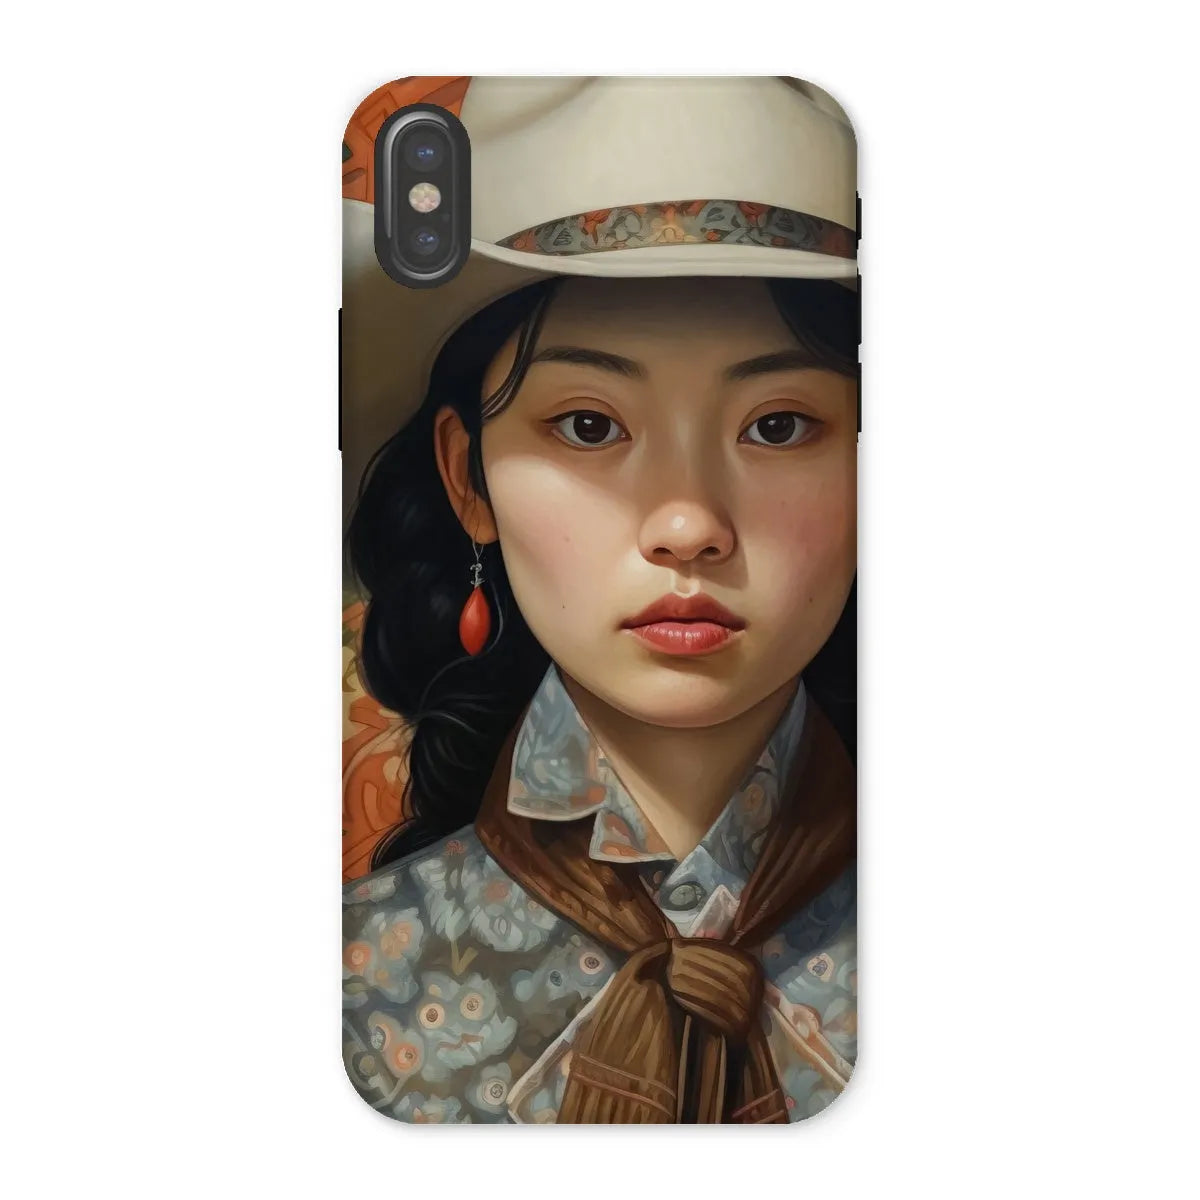 Zhi The Lesbian Cowgirl - Sapphic Art Phone Case - Iphone x / Matte - Mobile Phone Cases - Aesthetic Art